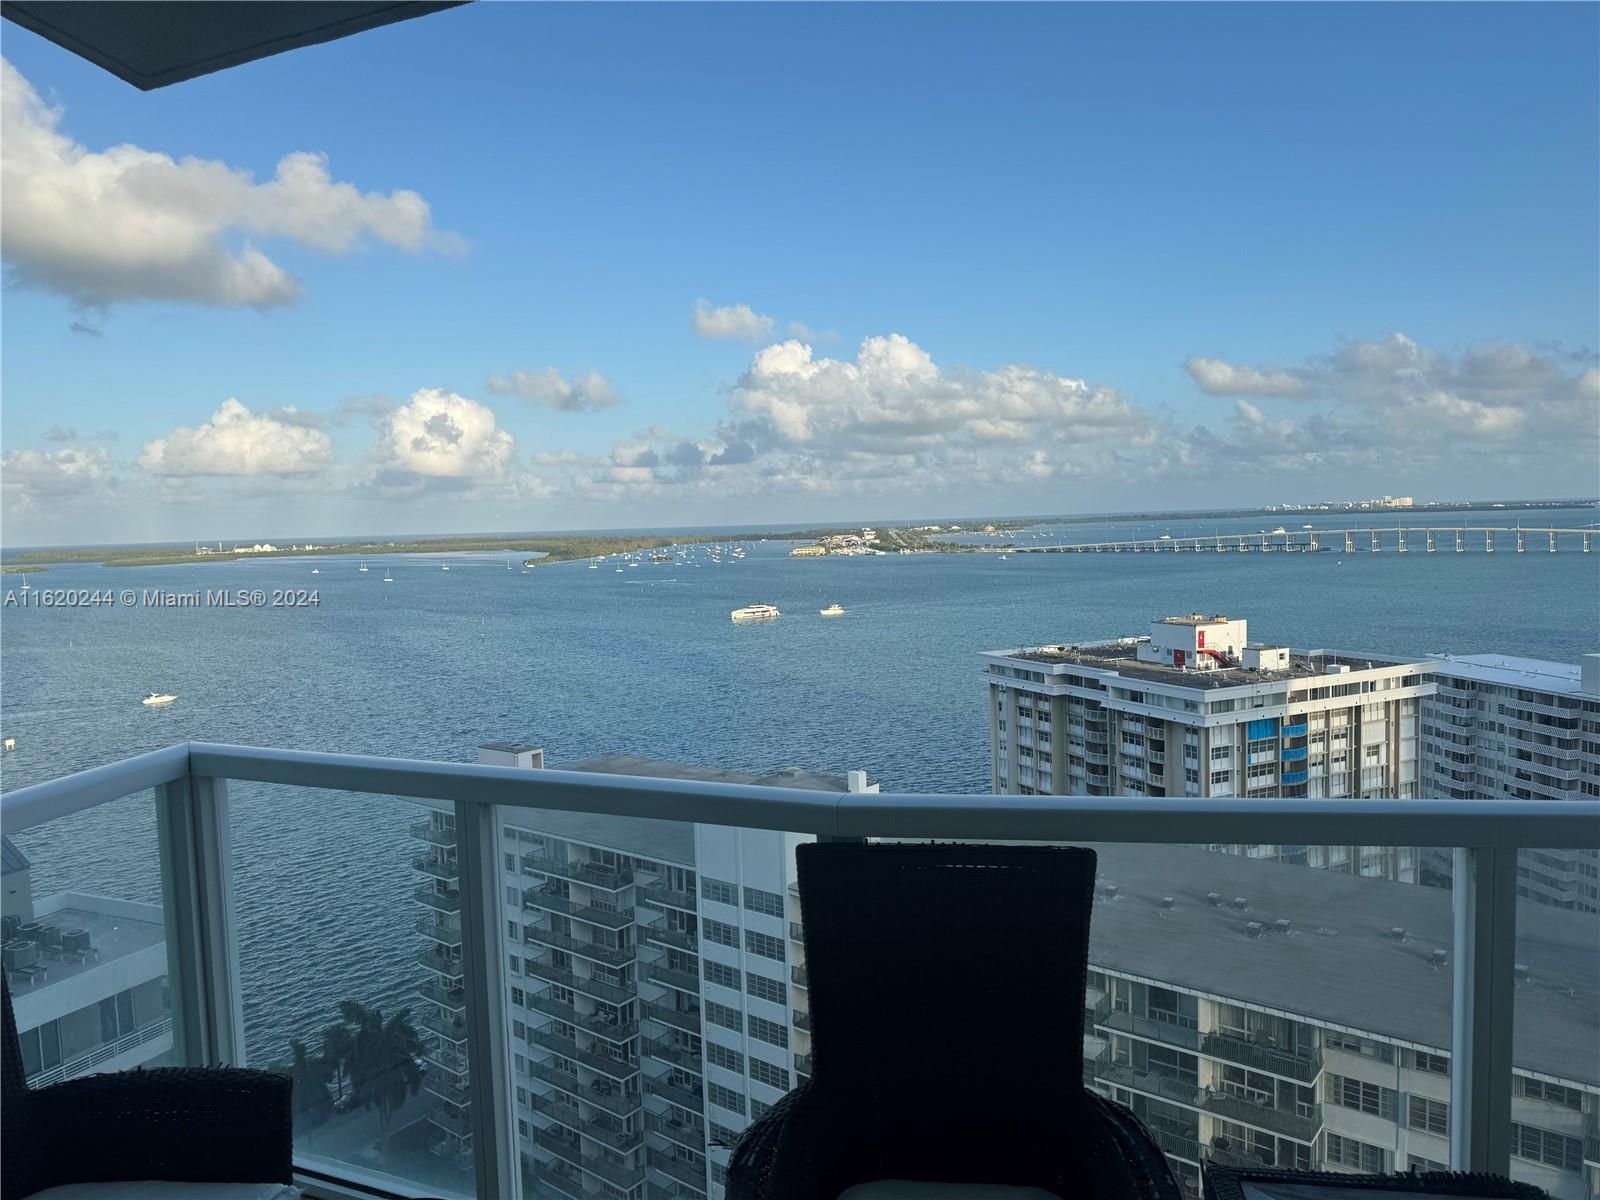 NEW in MARKET at Emerald Condo...Exclusive 07 line with  SE unobstructed panaramic 180 degree view of Bay and Ocean. Sunrises will be your pleasure daily as you sit back with your morning coffee. Enjoy the views of the City, Fisher Island, Key Biscayne and the Bright Blue Skies. This unit is extremely well kept and still looks newly renovated with Wood floors, Frosted Glass doors, Gorgeous open kitchen, Somfy window shades, Oversized Balcony, Venetian Plaster wall treatments, Toto automatic smart toilet and Pkg Spot #535. Emerald amenities include 24/7 concierge, water views, Rooftop Pool/ Jacuzzi, Valet Parking, Business Center, Conference Room, Gym overlooking the Ocean and more. You will live a city Life with walking distance to Restaurants, Brickell City Center, etc.